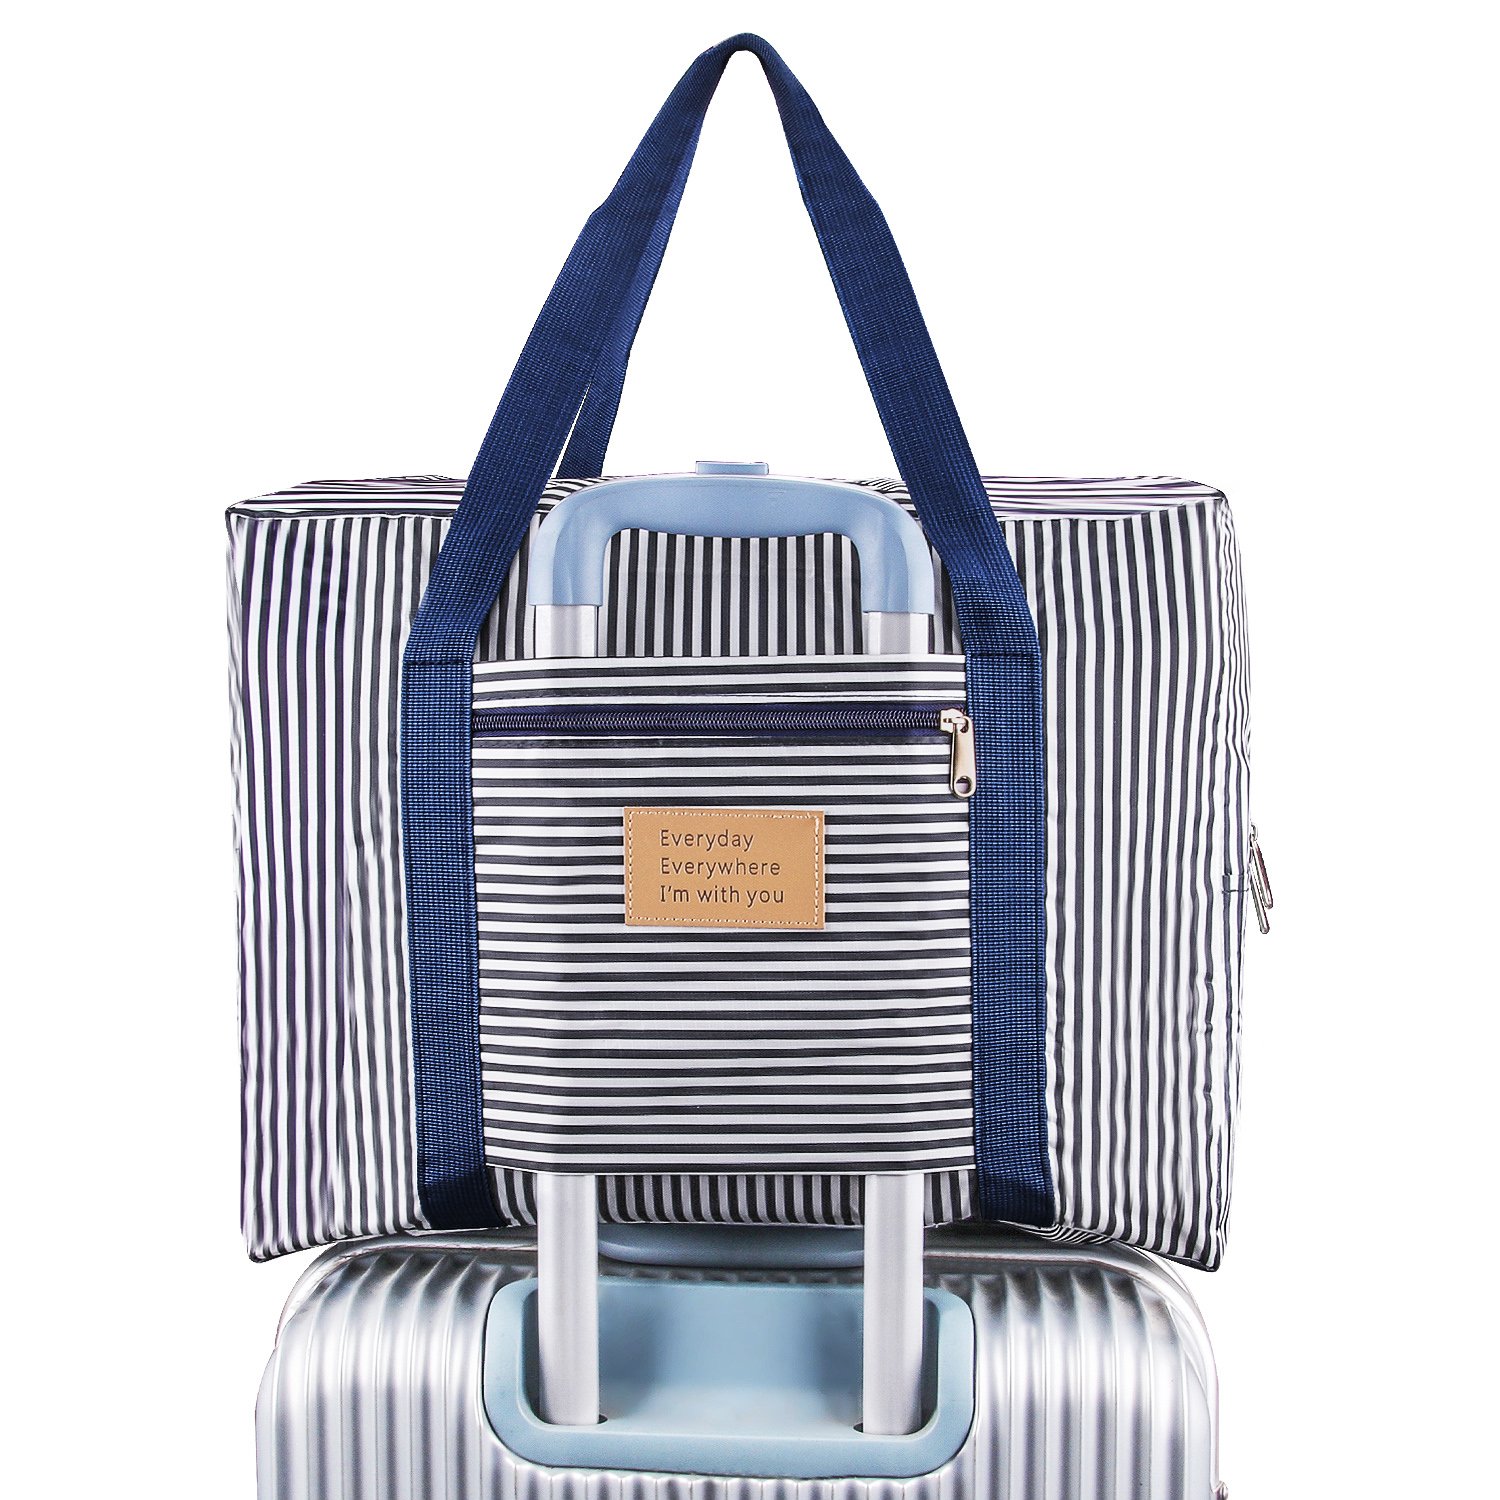 The 10 Best Travel Totes Bags 2022 - Luggage & Travel